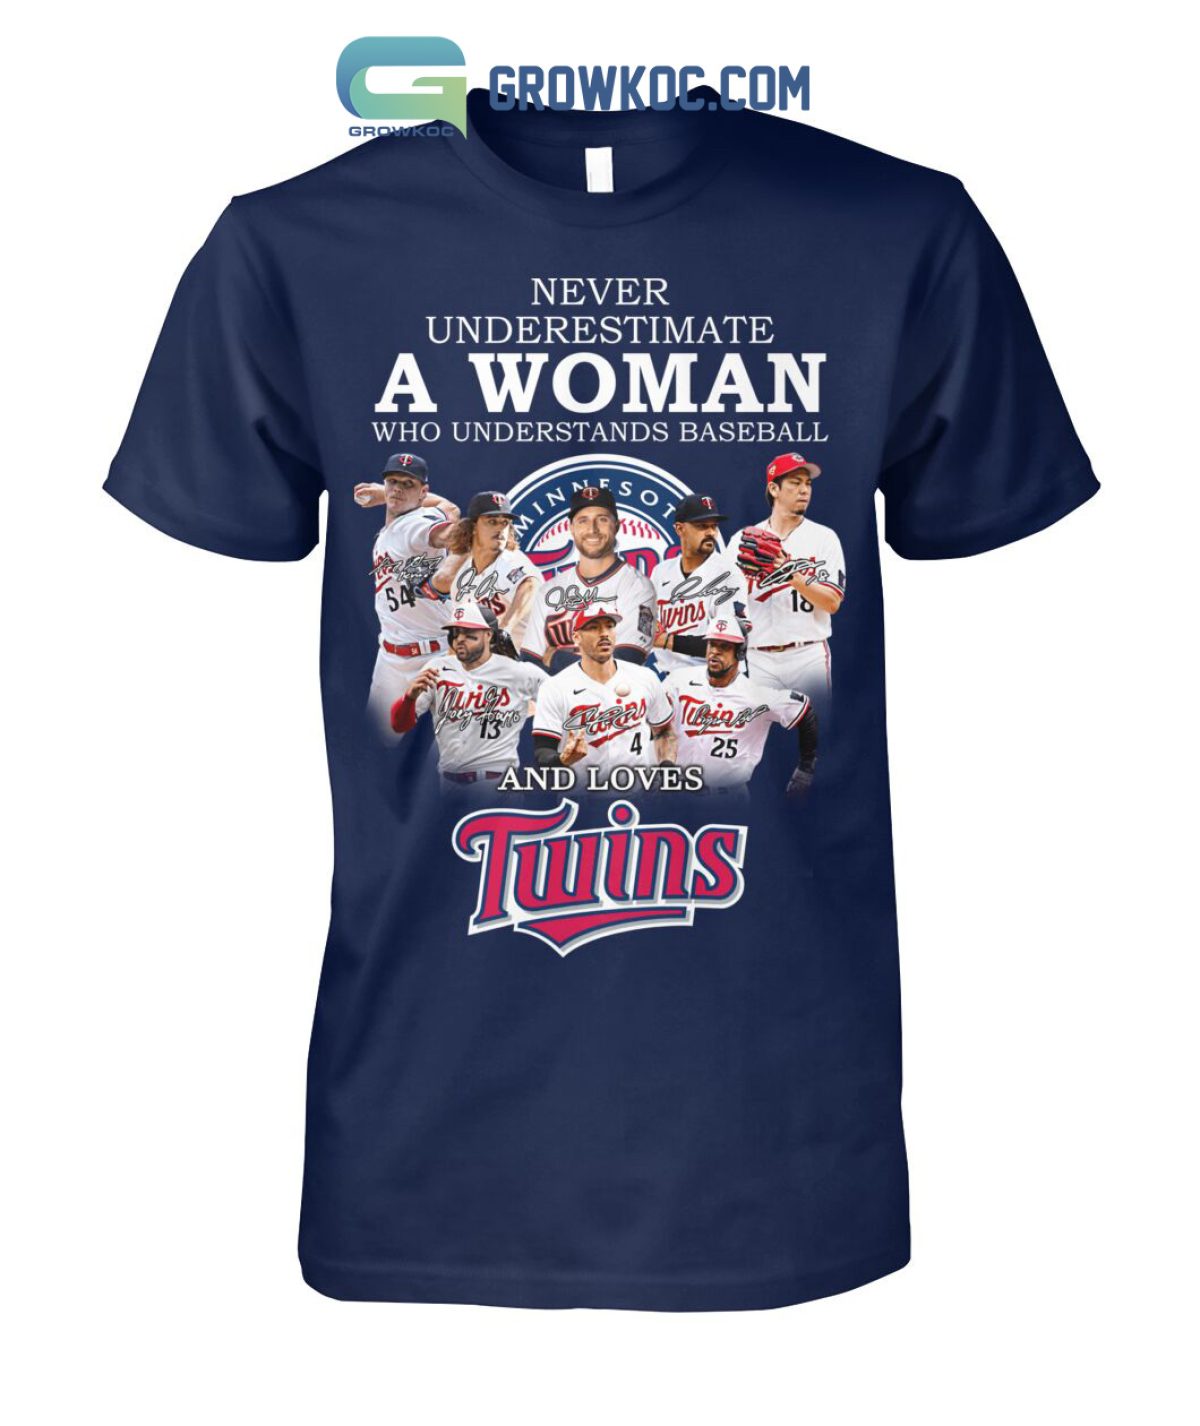 Never Underestimate A Woman Who Understands Baseball And Loves Twins T Shirt  - Growkoc